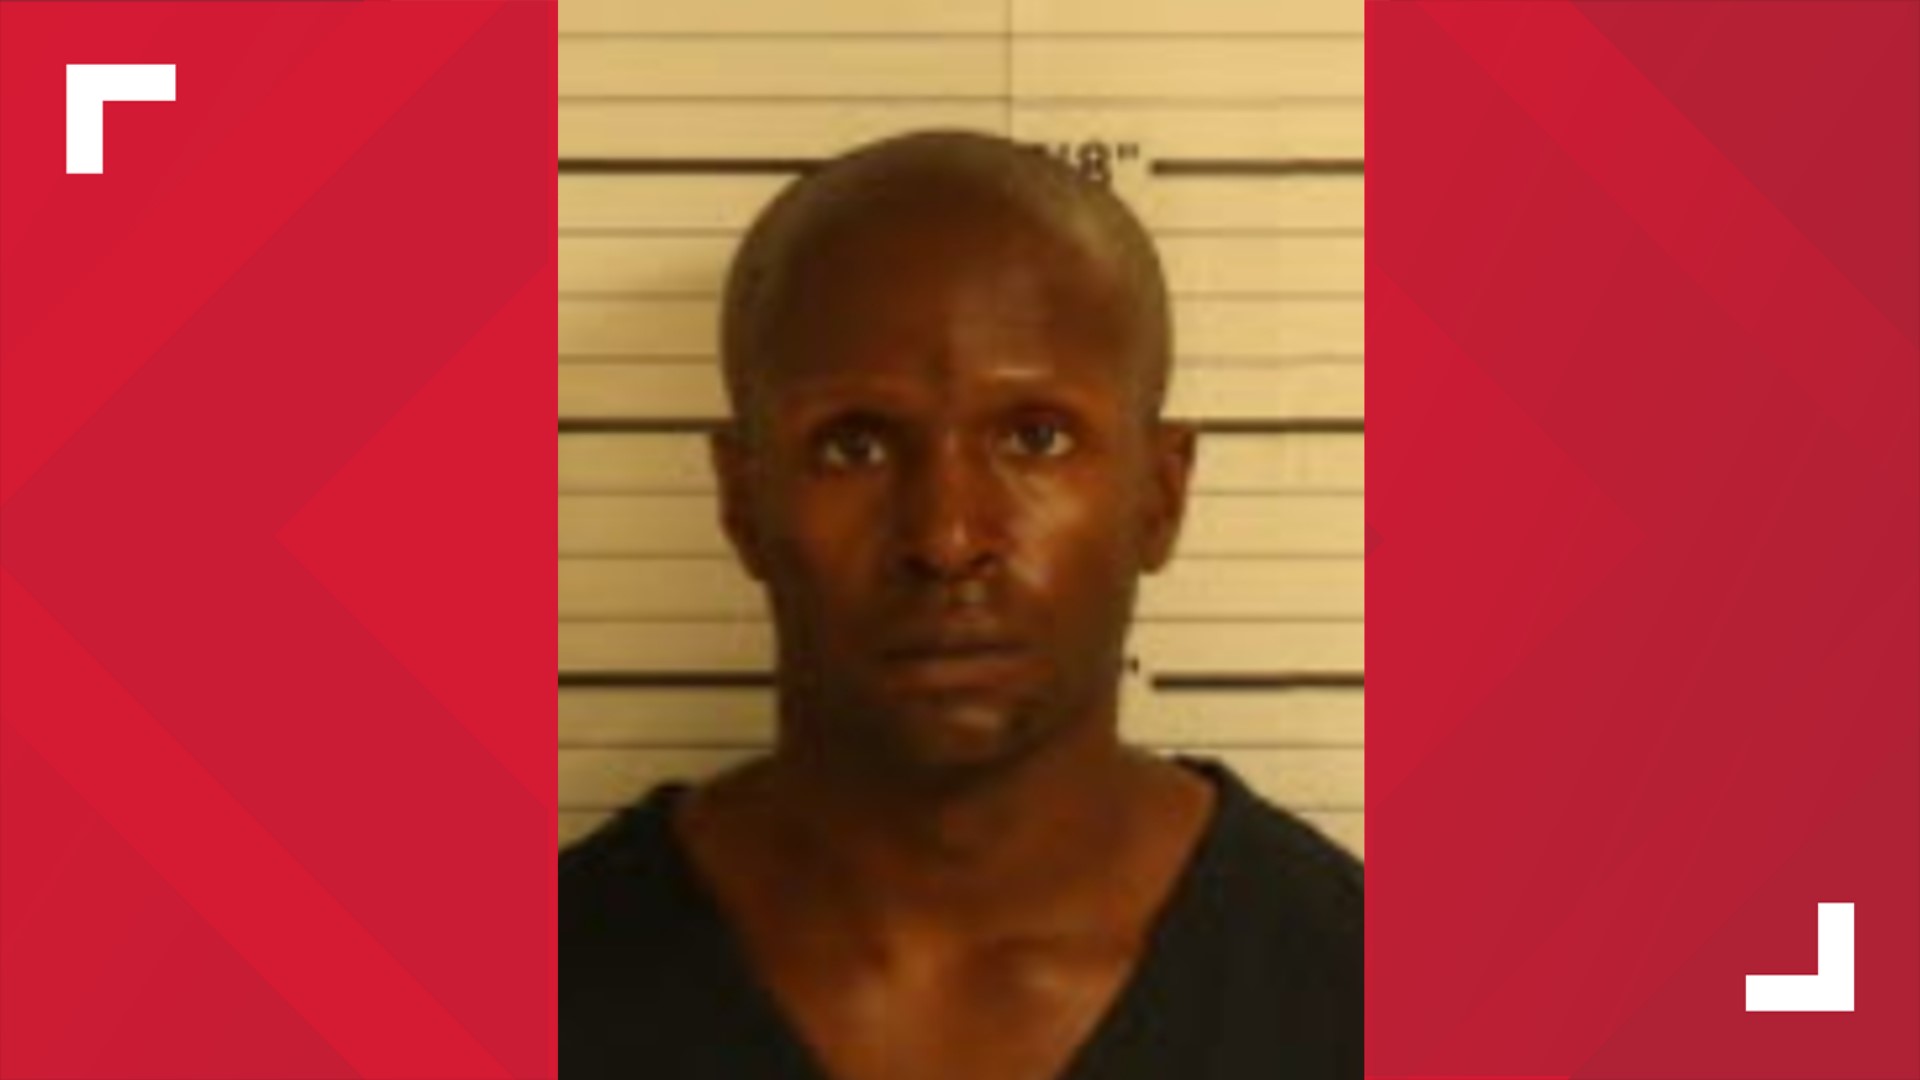 According to an affidavit, Marcus Williamson kidnapped the woman and forced her to withdraw $500 at an ATM.